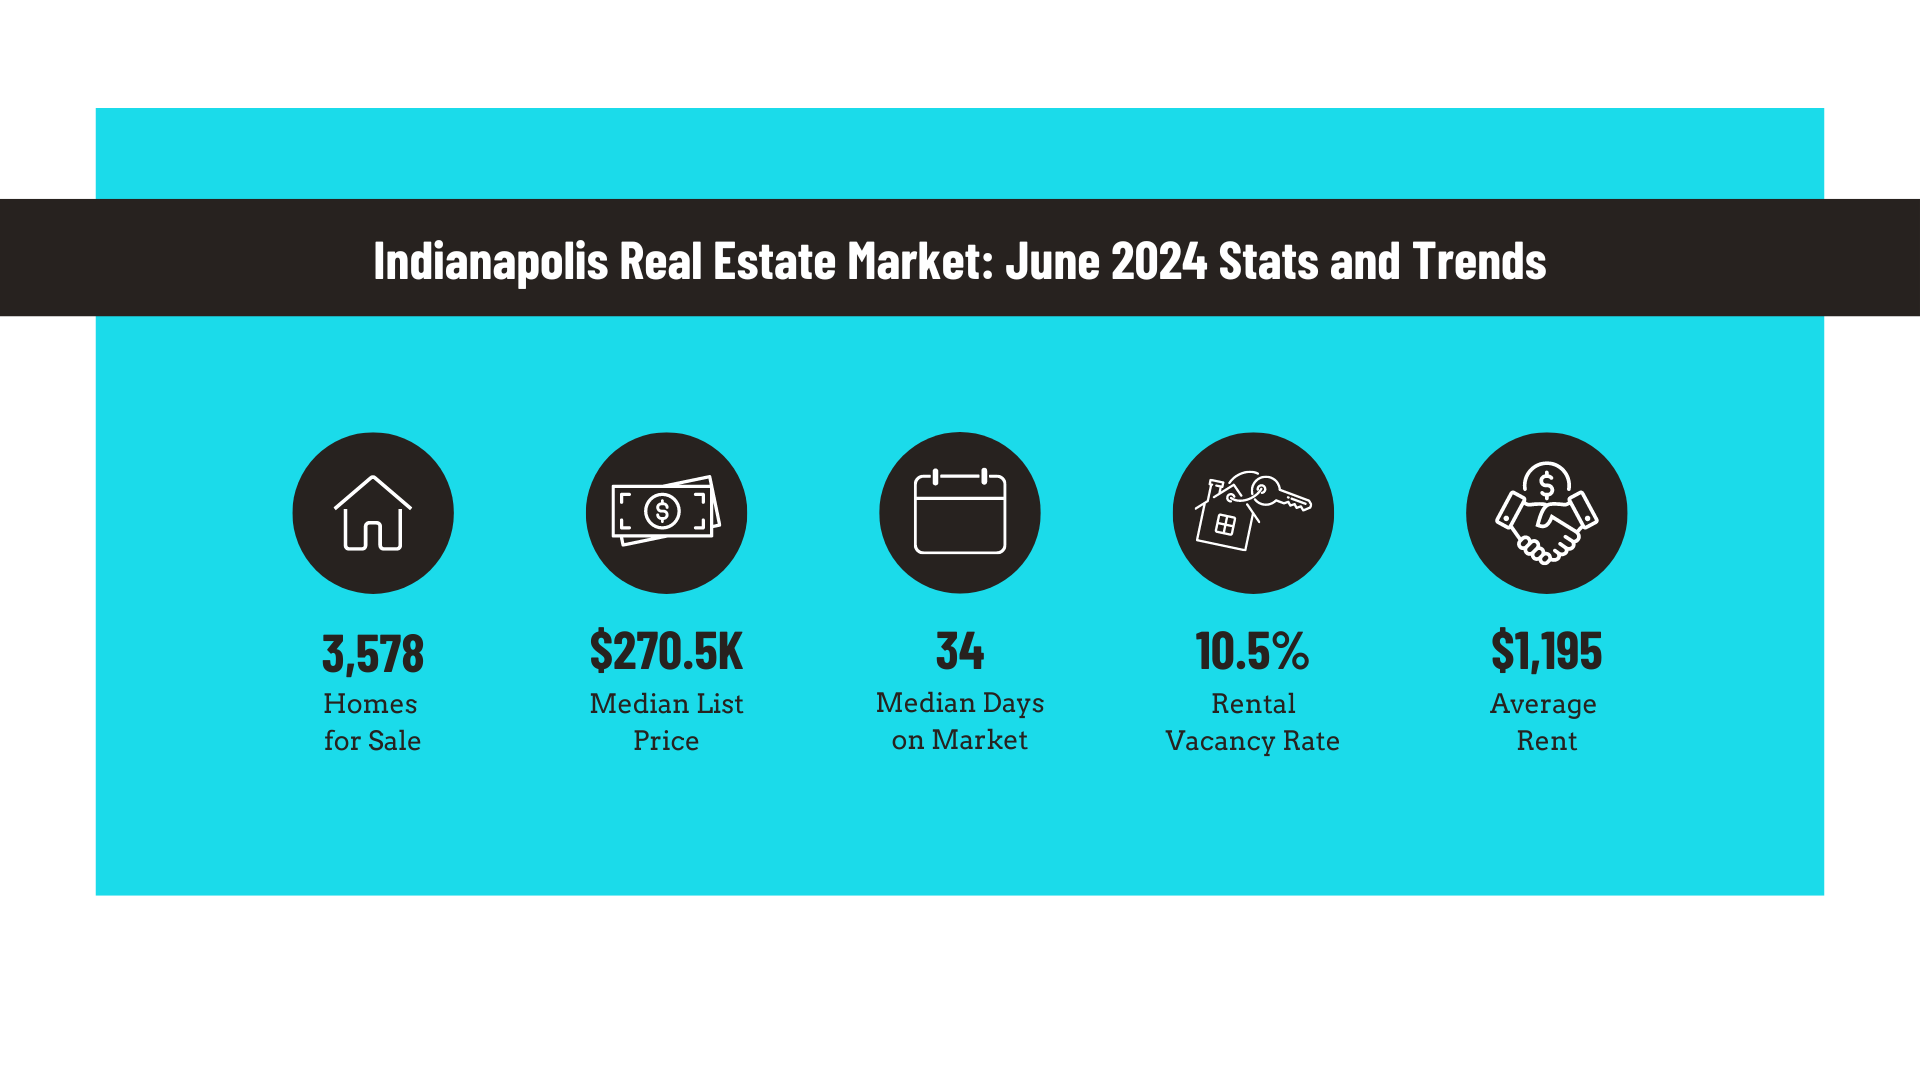 top trends in the Indianapolis real estate market (June 2024):